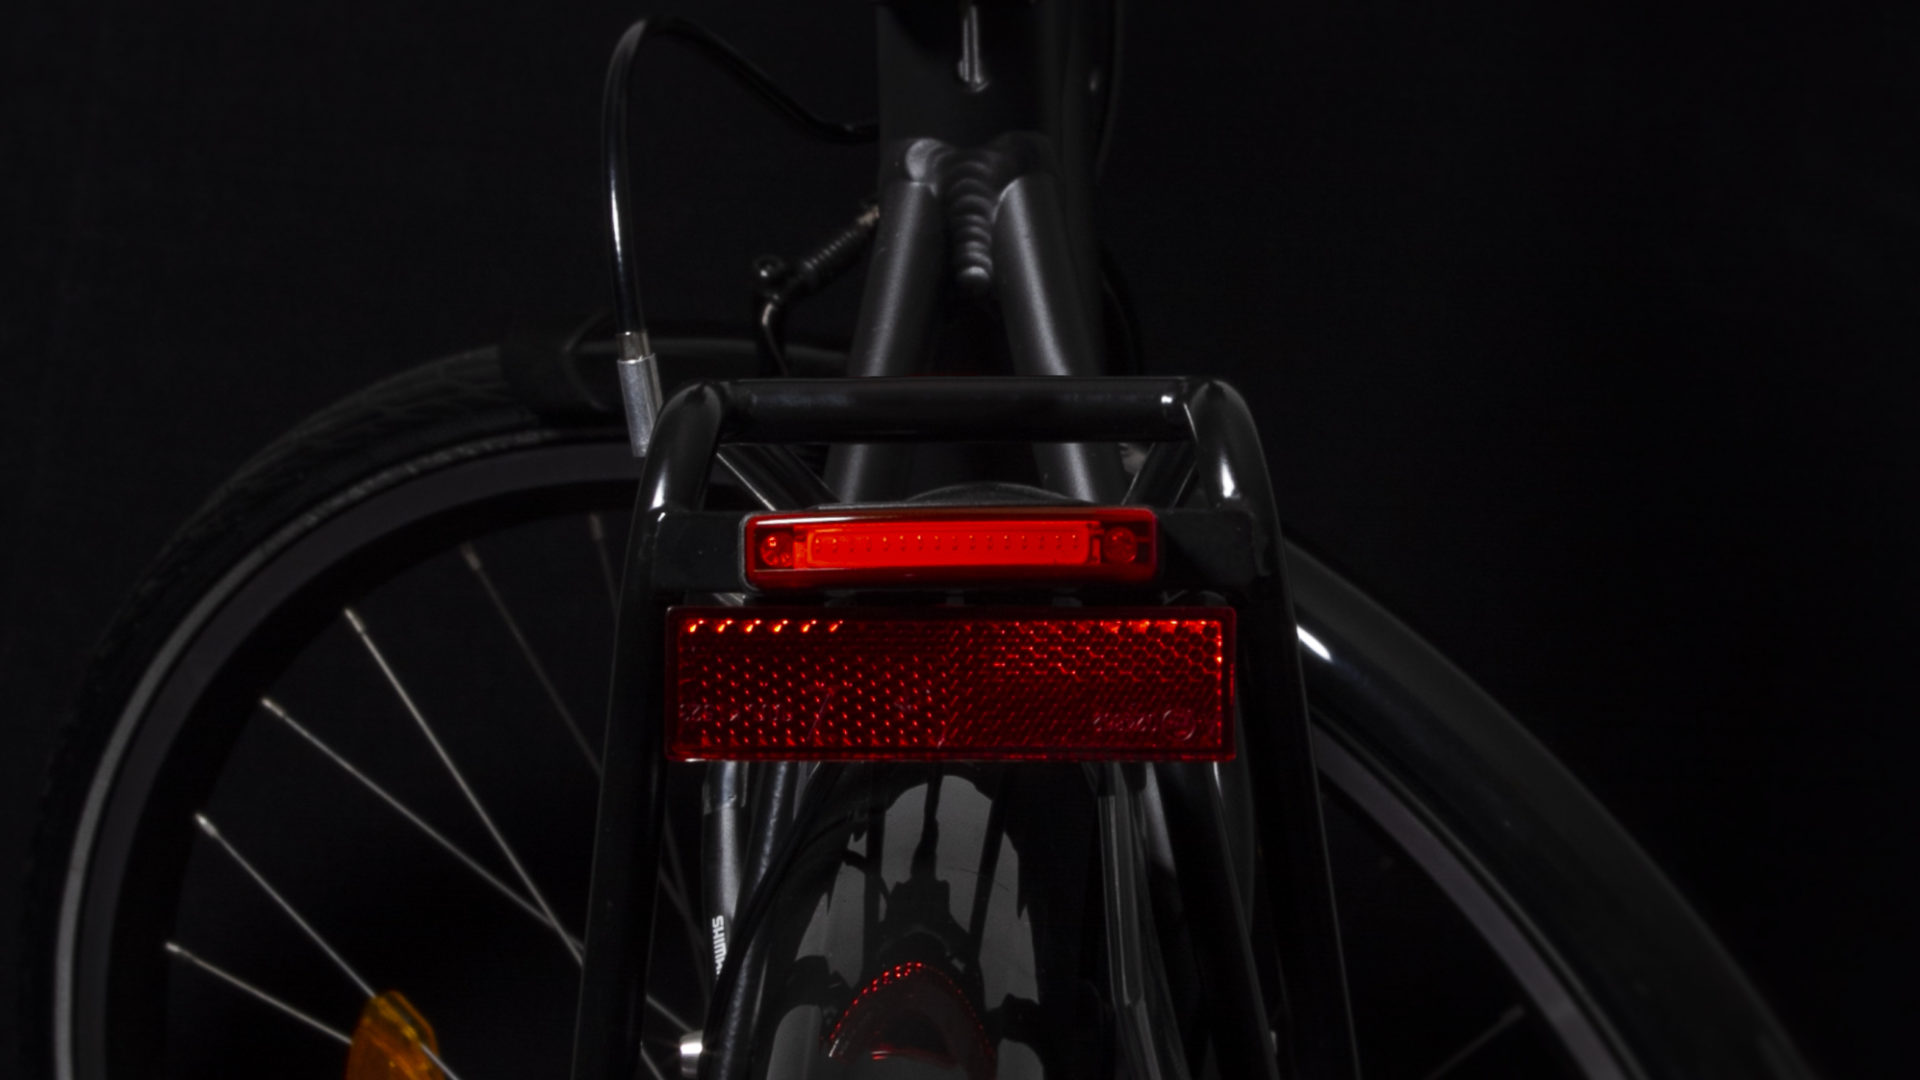 Pimento Speed rearlight with Rr 02 rear reflector on carrier (light off)